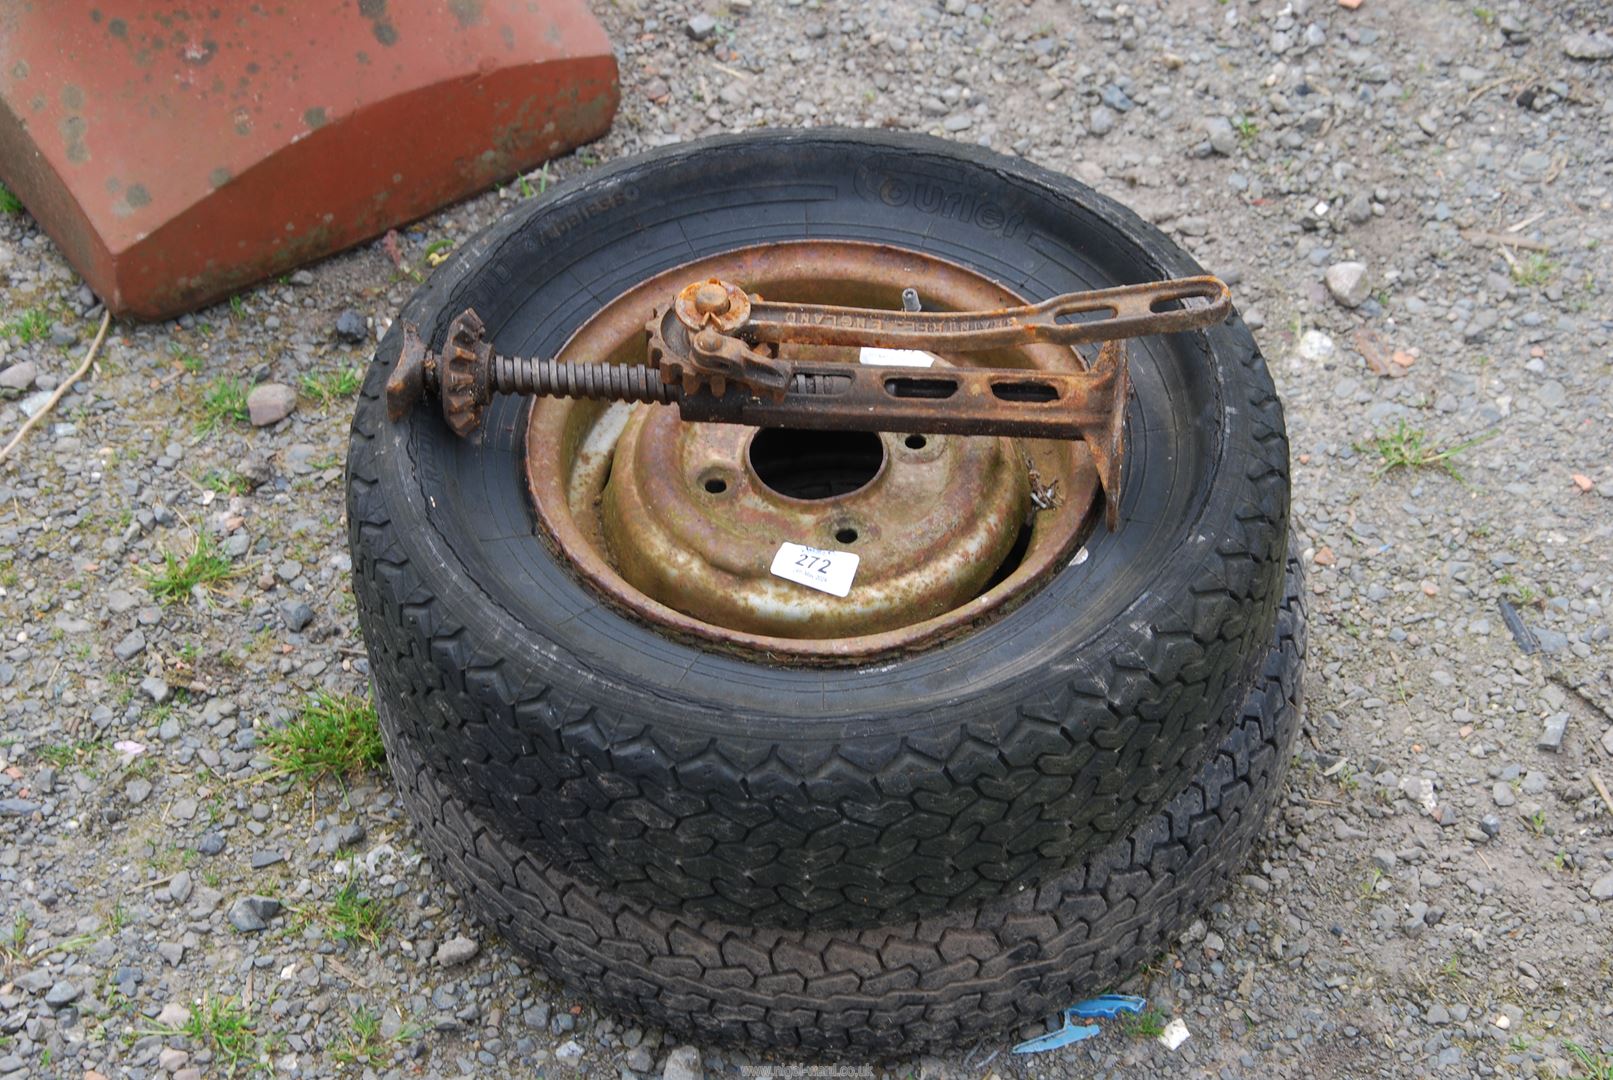 10" mini wheels and tyres (as found) and a cart jack.